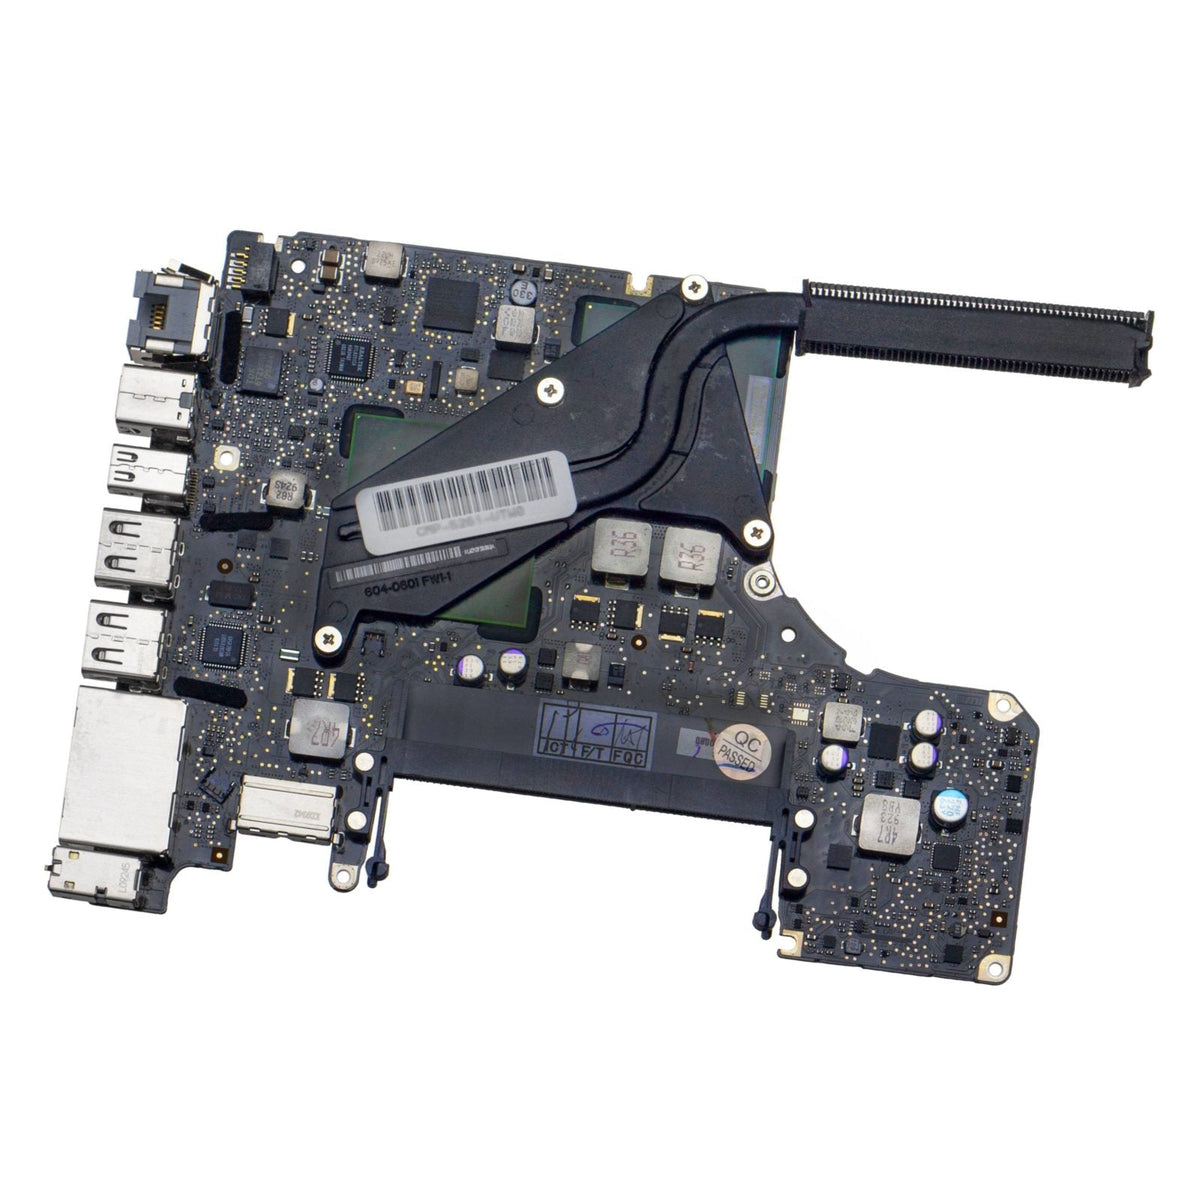 MOTHERBOARD FOR MACBOOK PRO 13" A1278 (MID 2009)